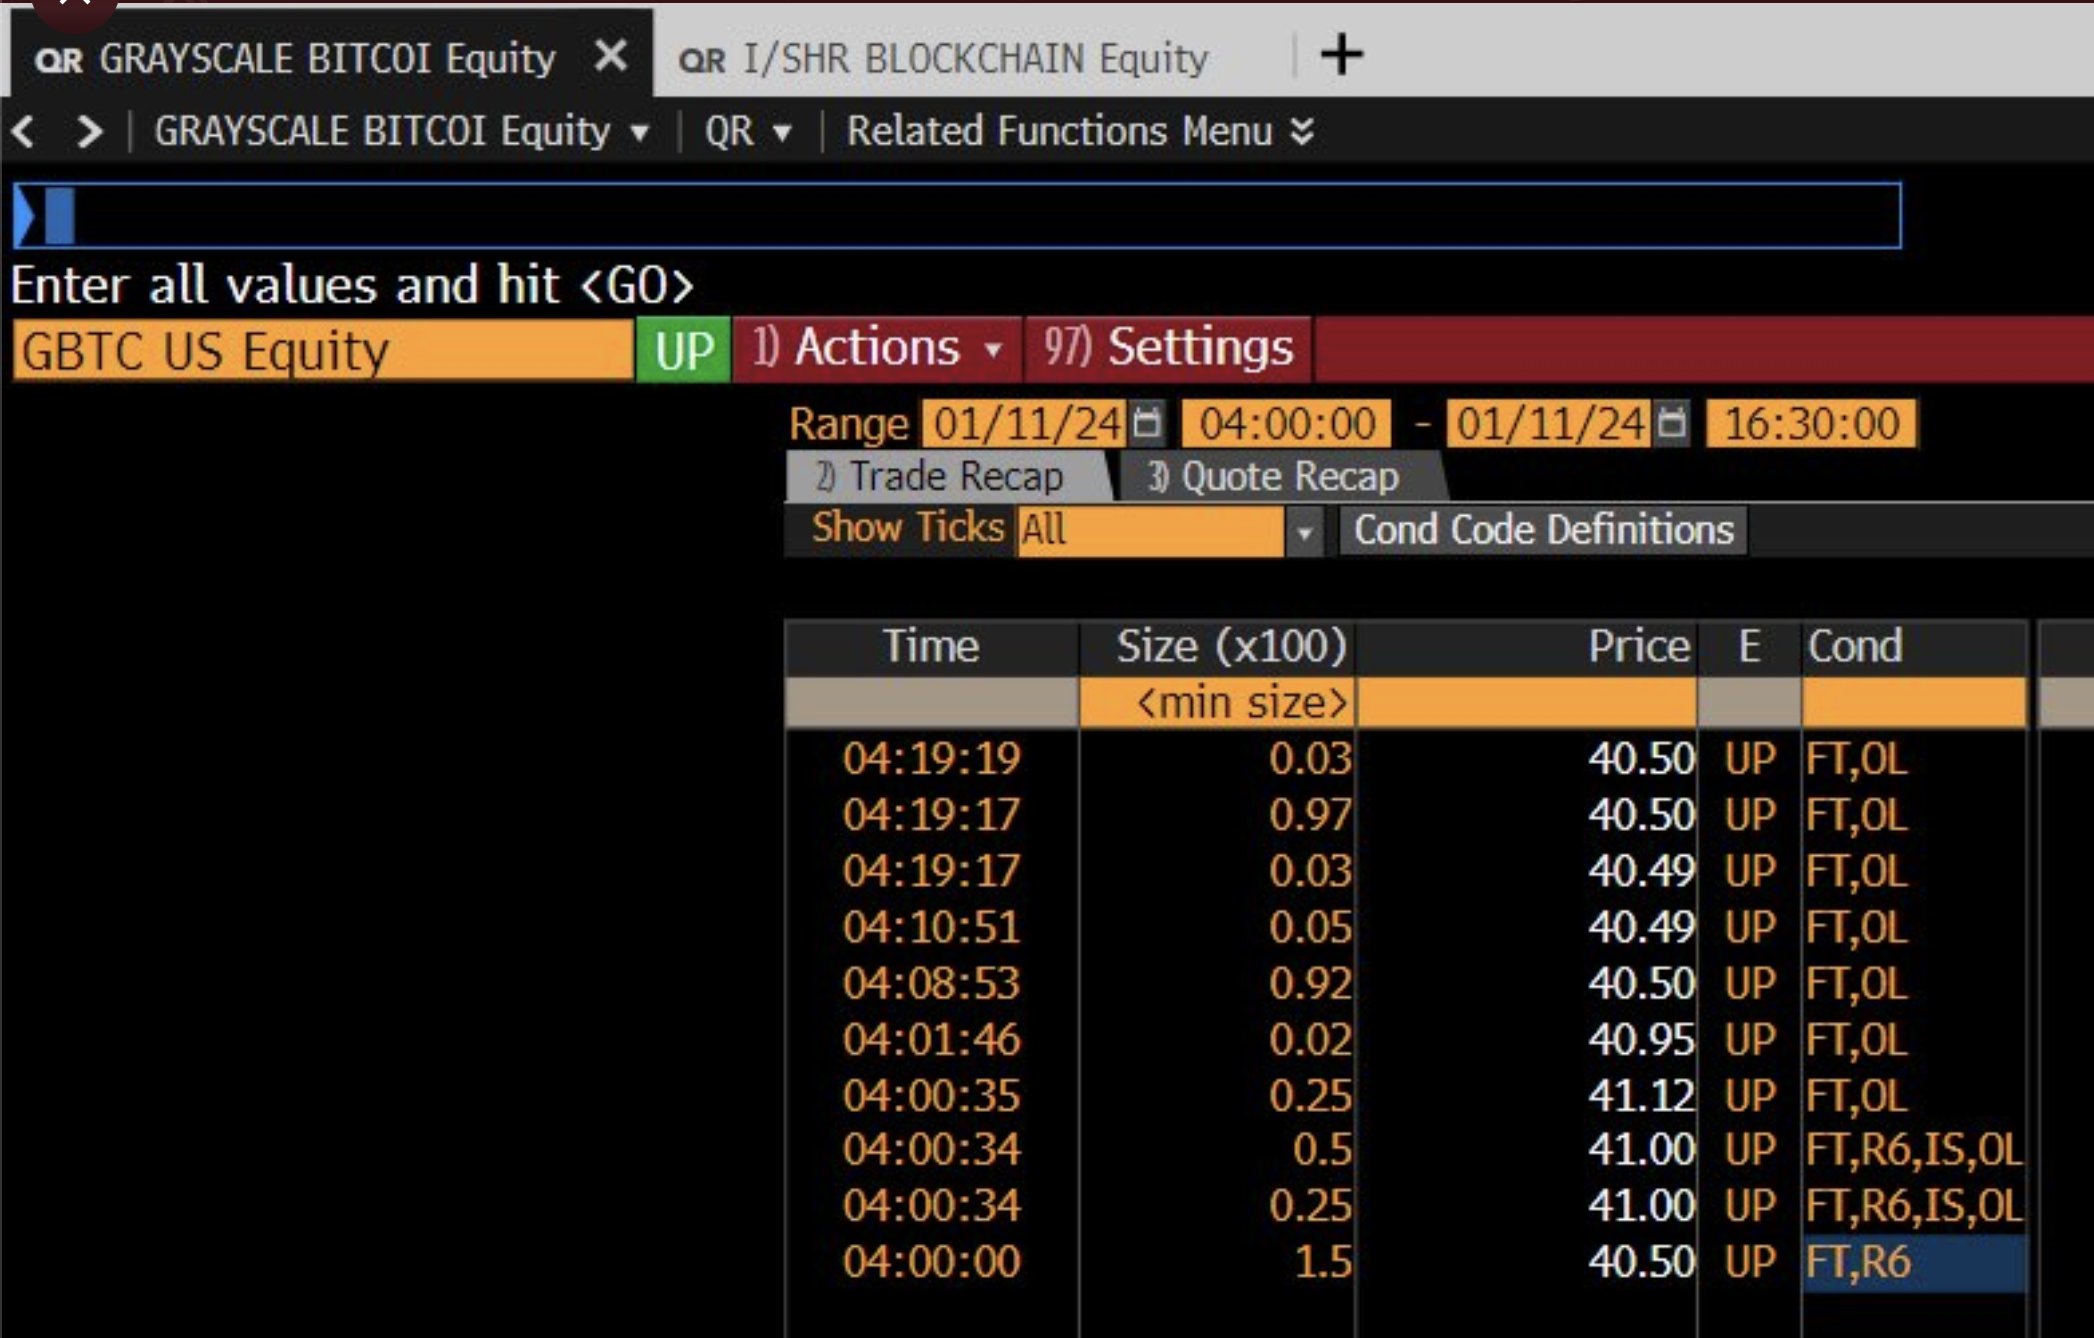 GBTC US Equity: (Source: Bloomberg, @BTC_Archive)